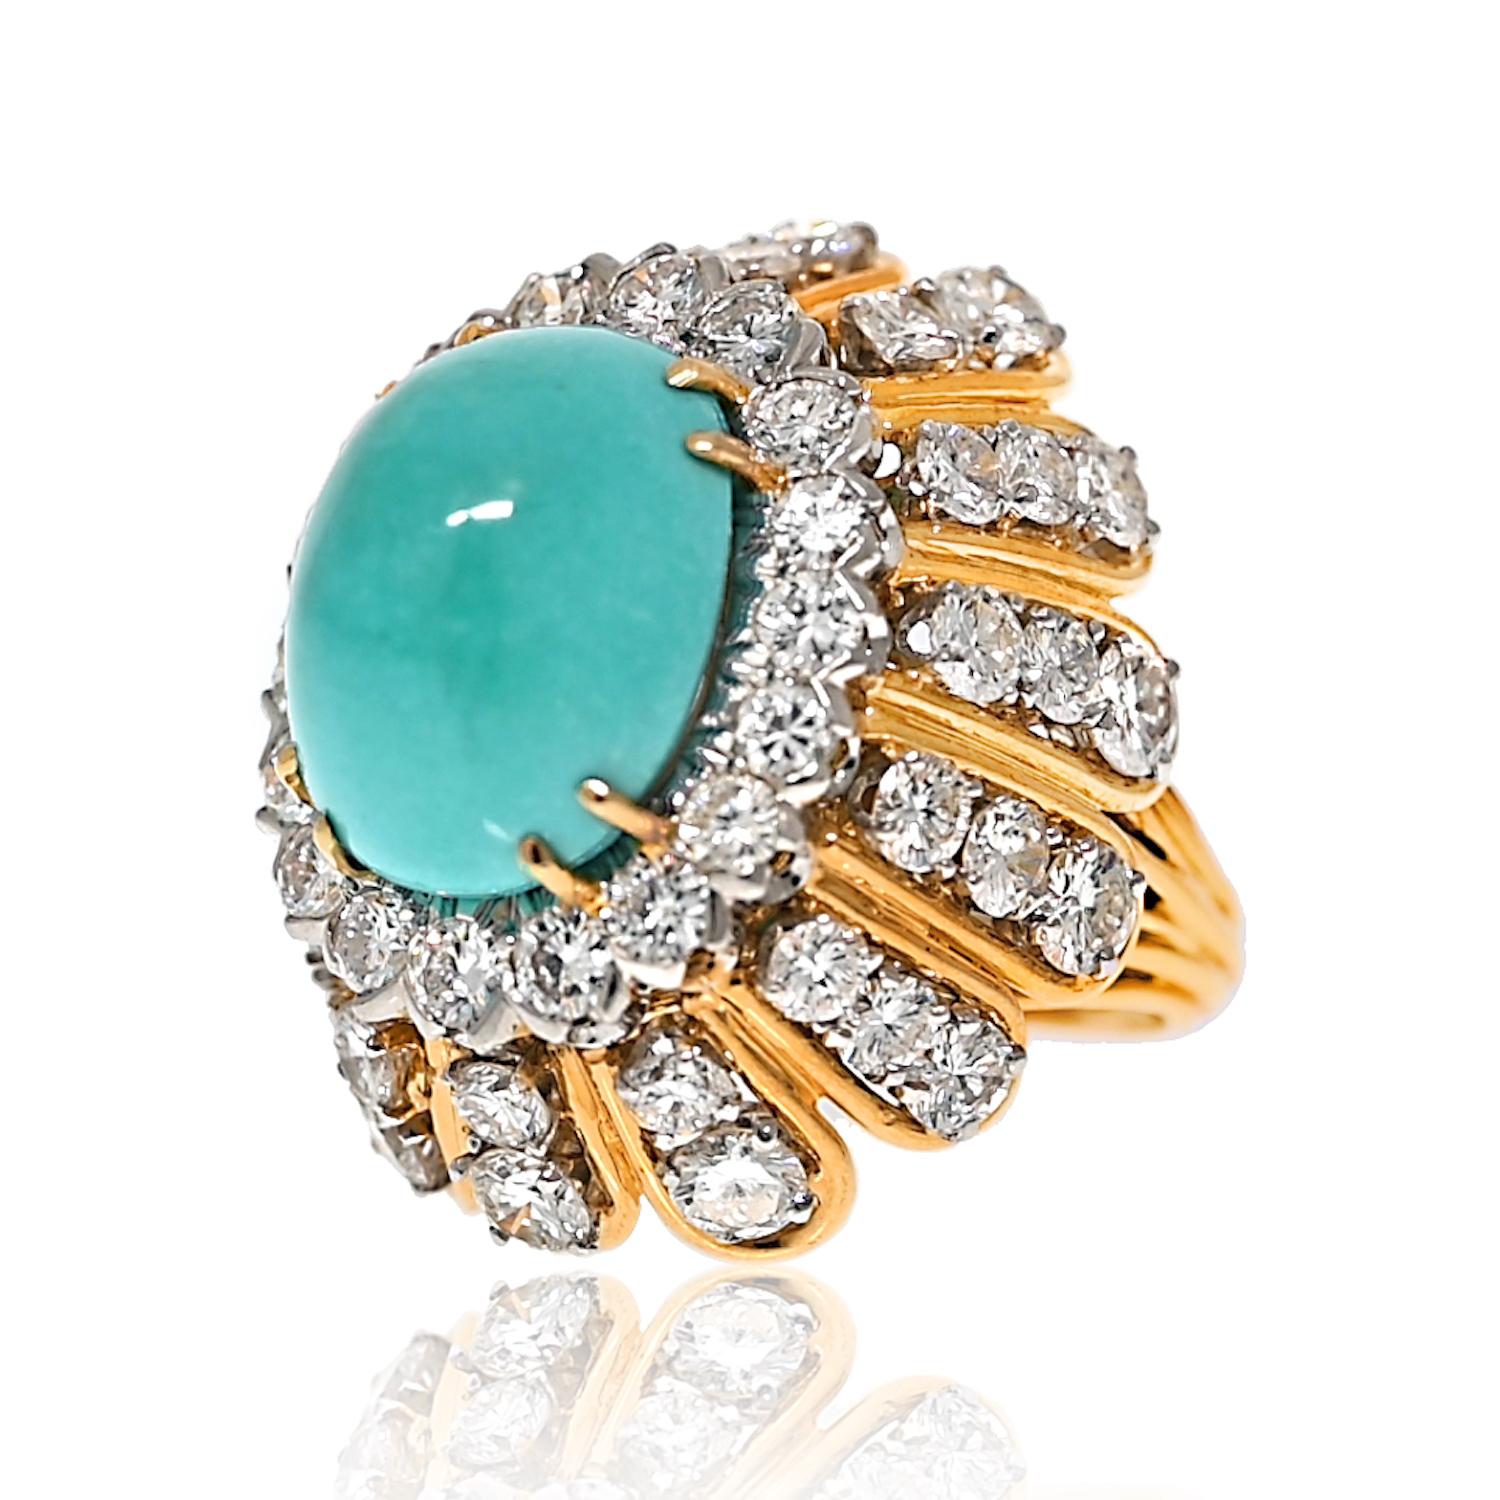 Step into a world of enchanting elegance with this exquisite cabochon cut turquoise and diamond impressive cocktail ring by the renowned designer David Webb. 

The focal point of this captivating piece is a mesmerizing sky blue cabochon turquoise